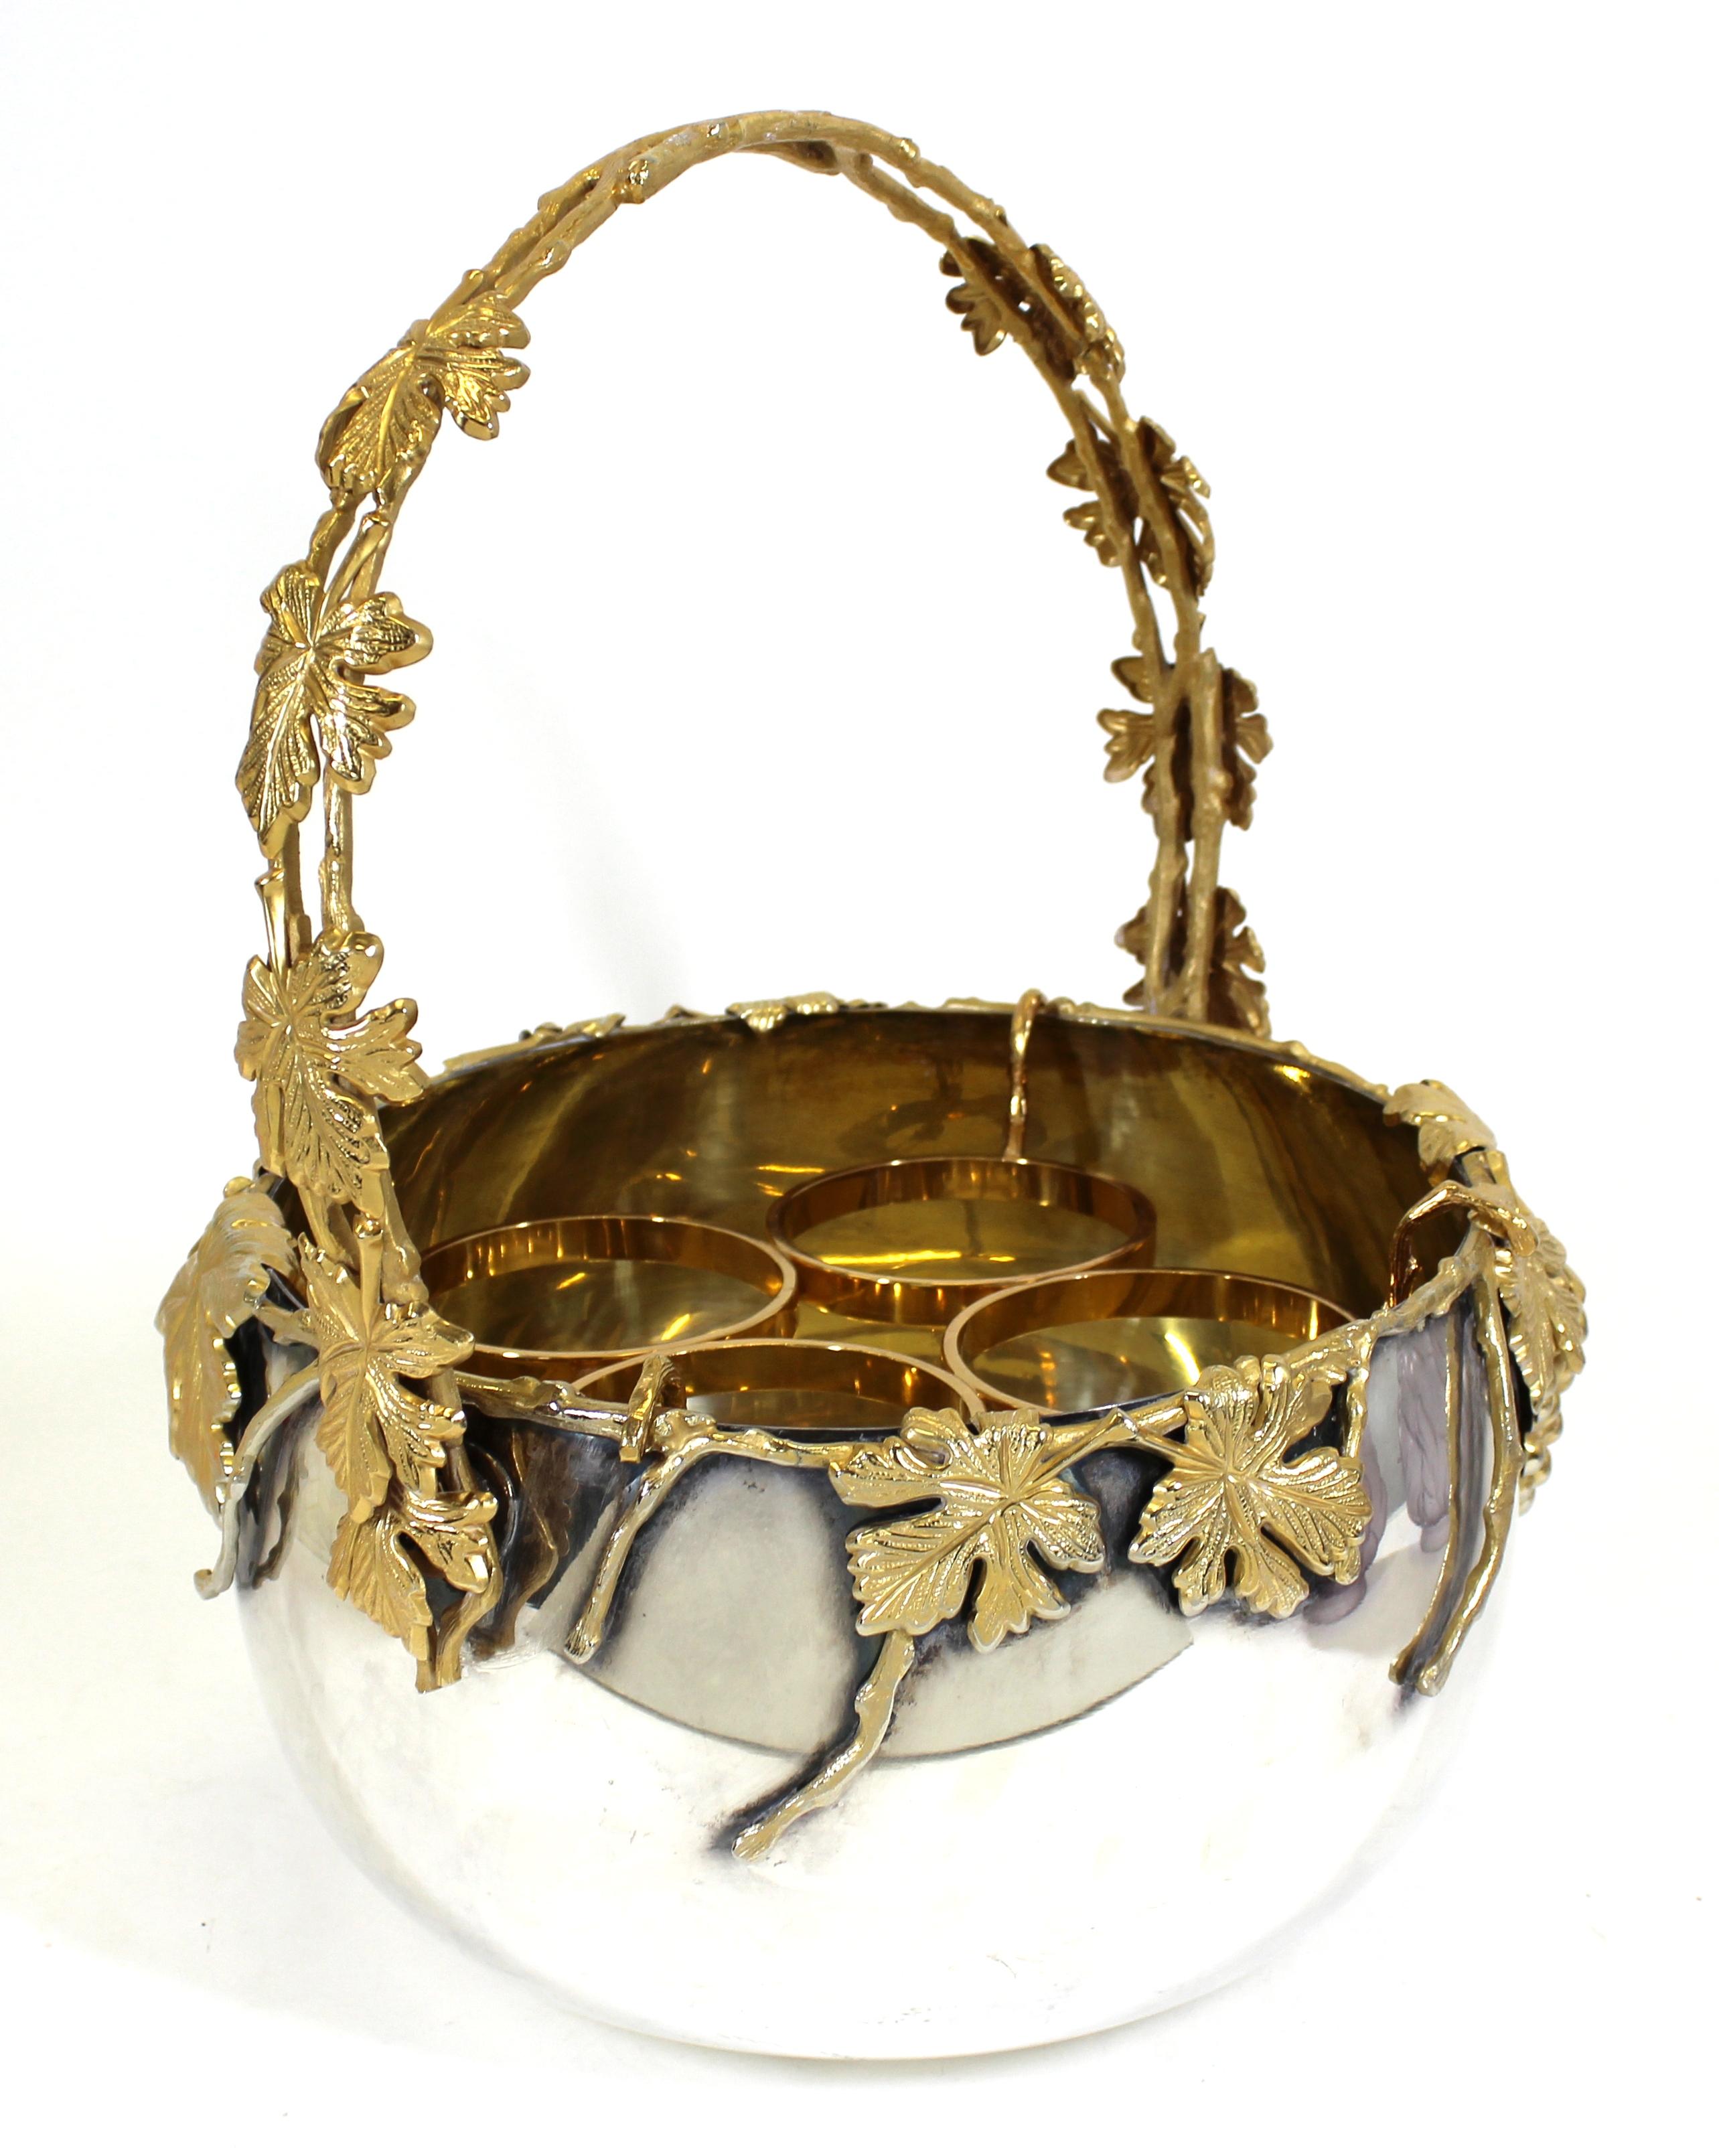 Italian Mid-Century Modern silver-plate and gilt wine cooler or champagne caddy, able to hold four bottles, made by Egidio Broggi in Milan, Italy. Ornamental gilt grape and leaf decoration on the handle and around the rim of the caddy. Retains its